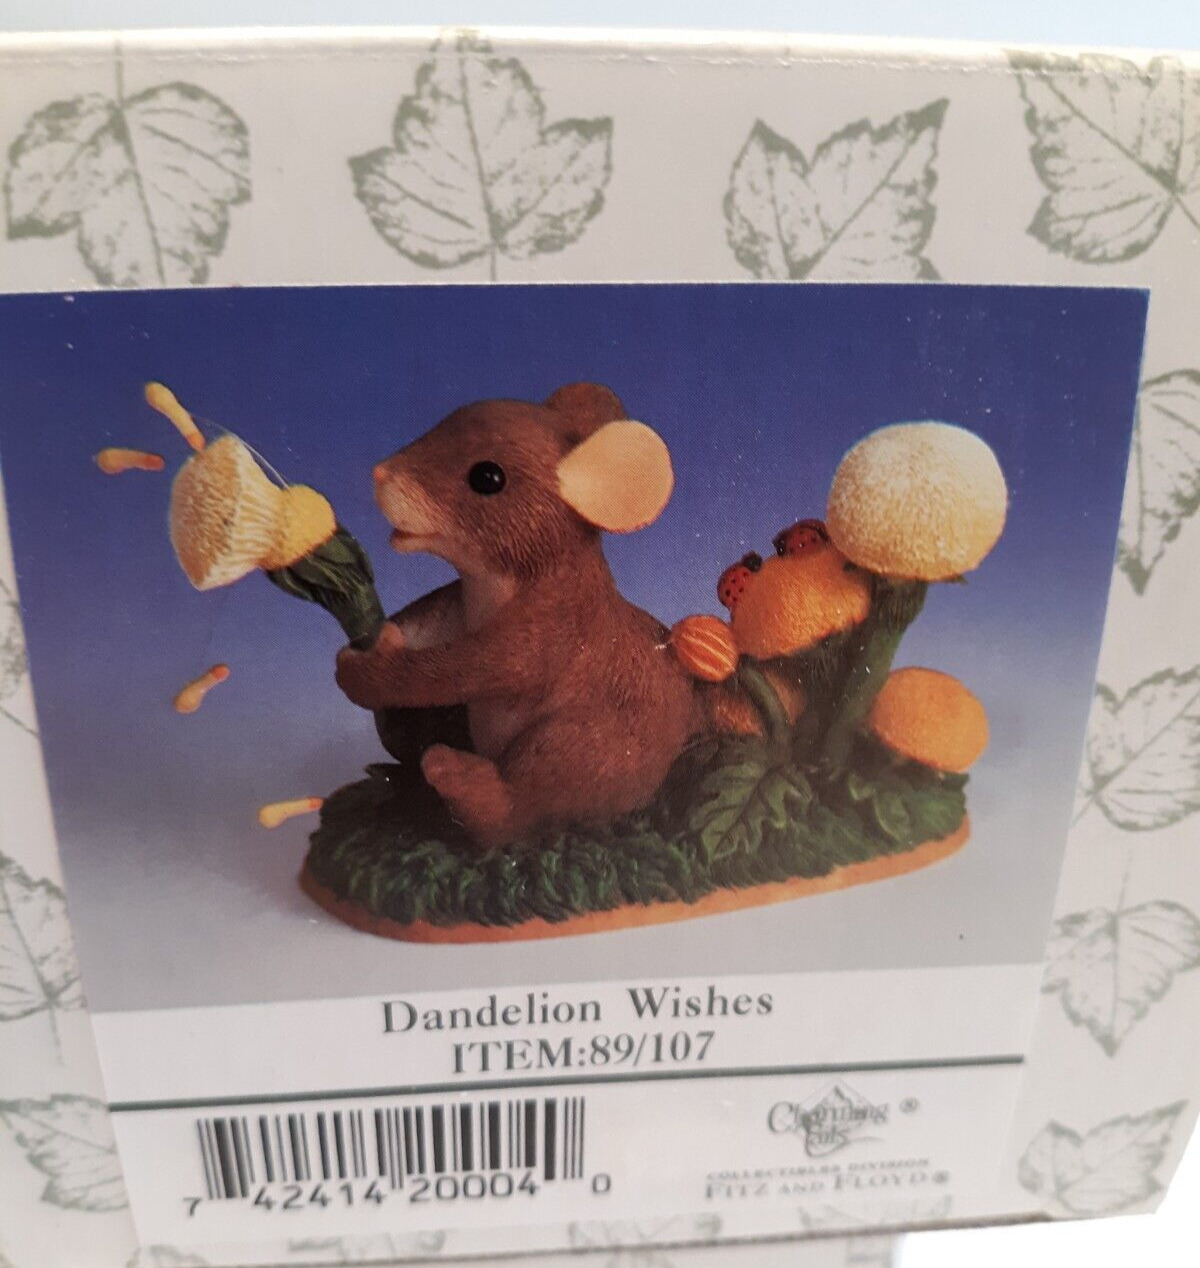 Charming Tales Dandelion Wishes 89/107 never opened